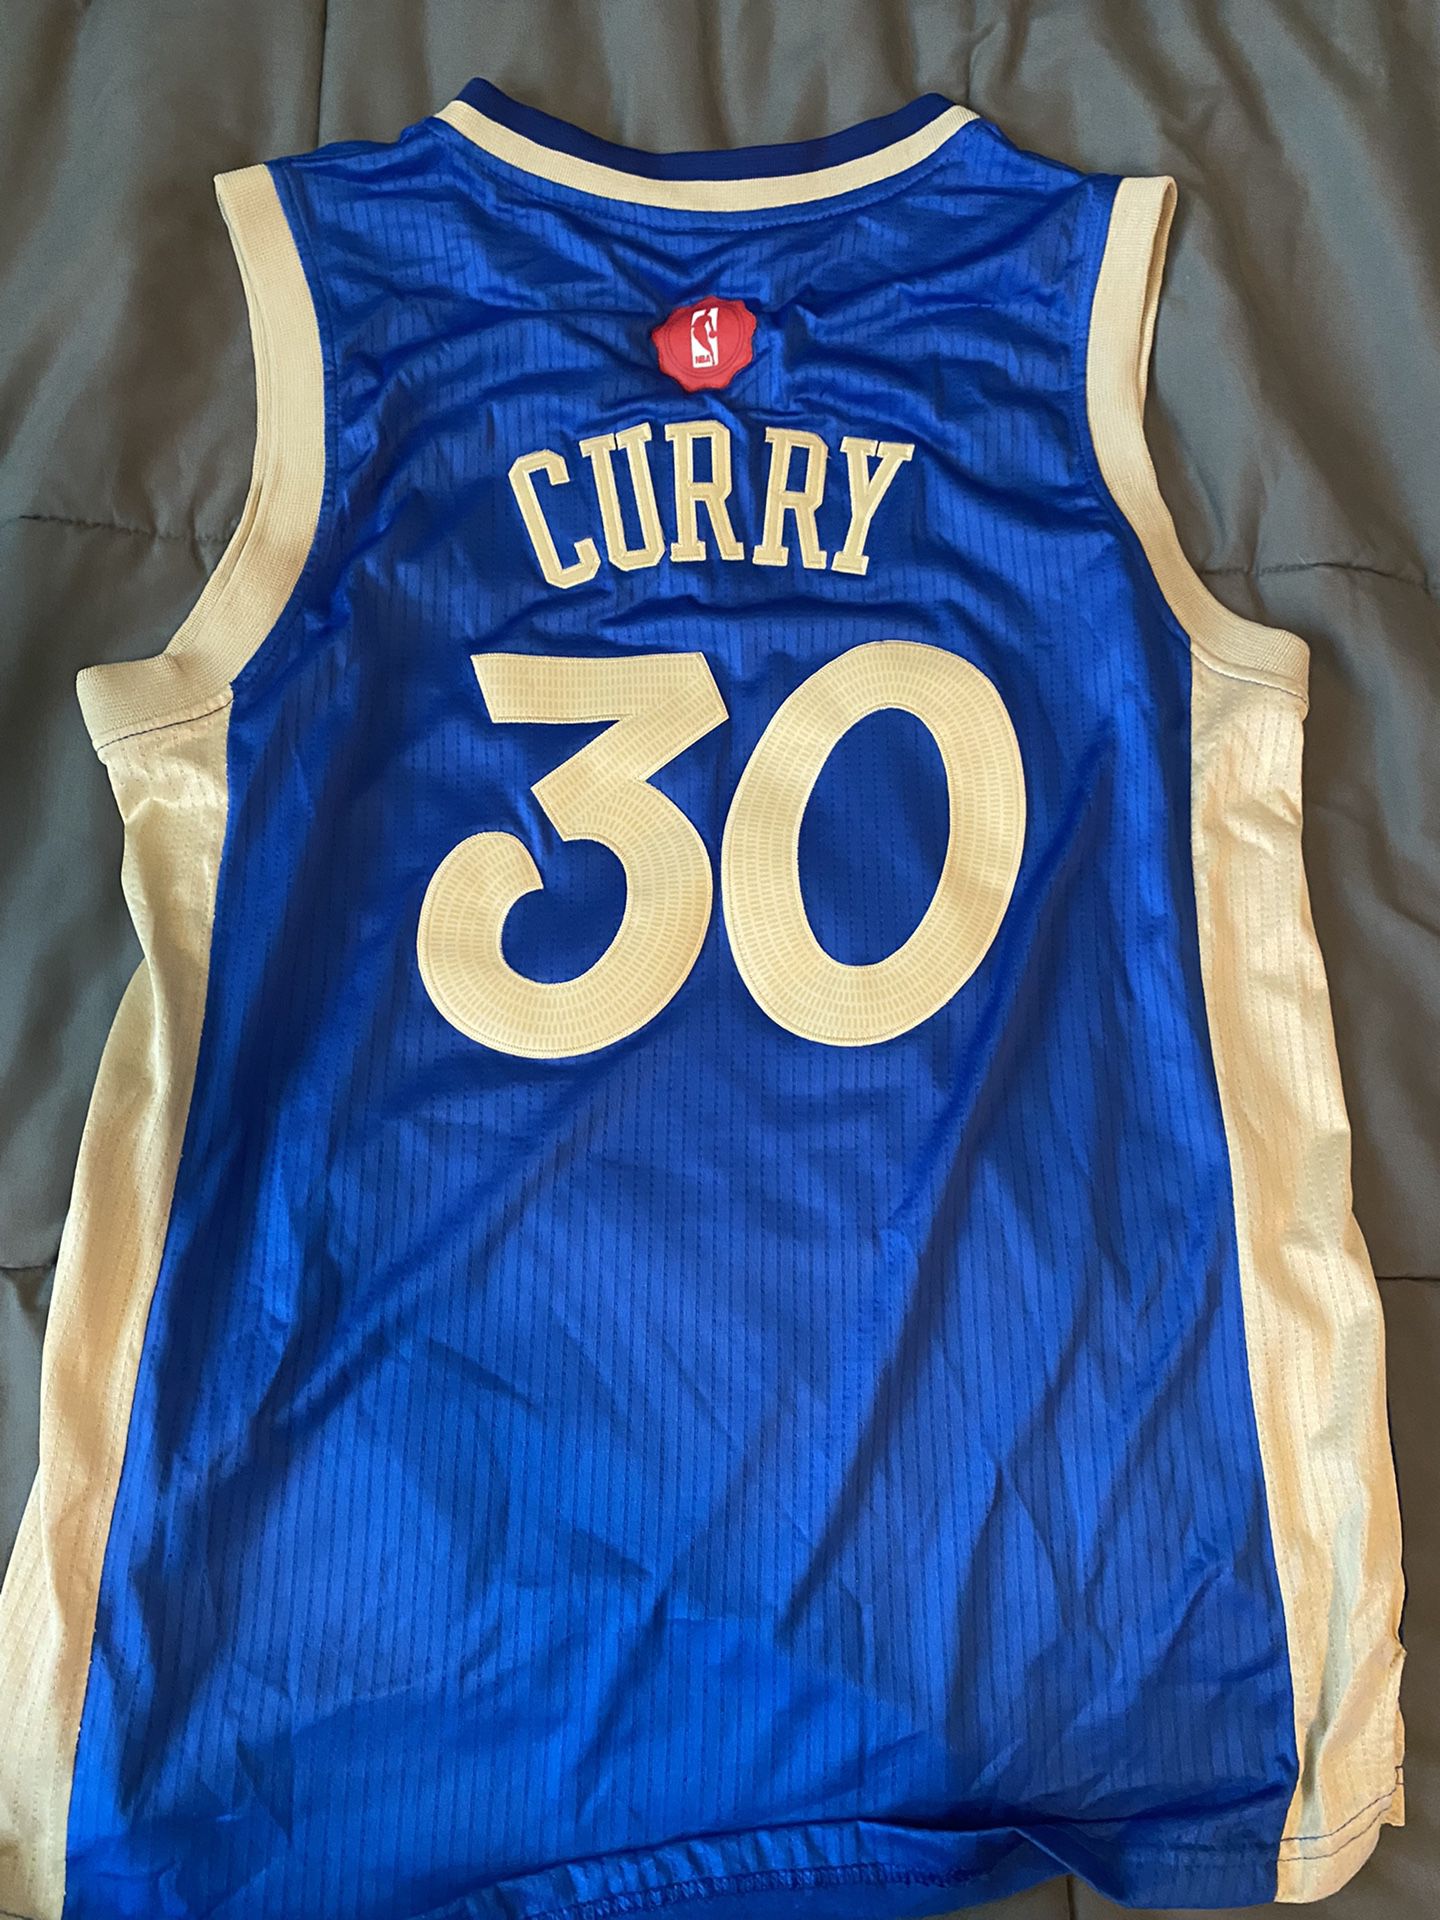 Stephen Curry Rookie Jersey for Sale in South San Francisco, CA - OfferUp